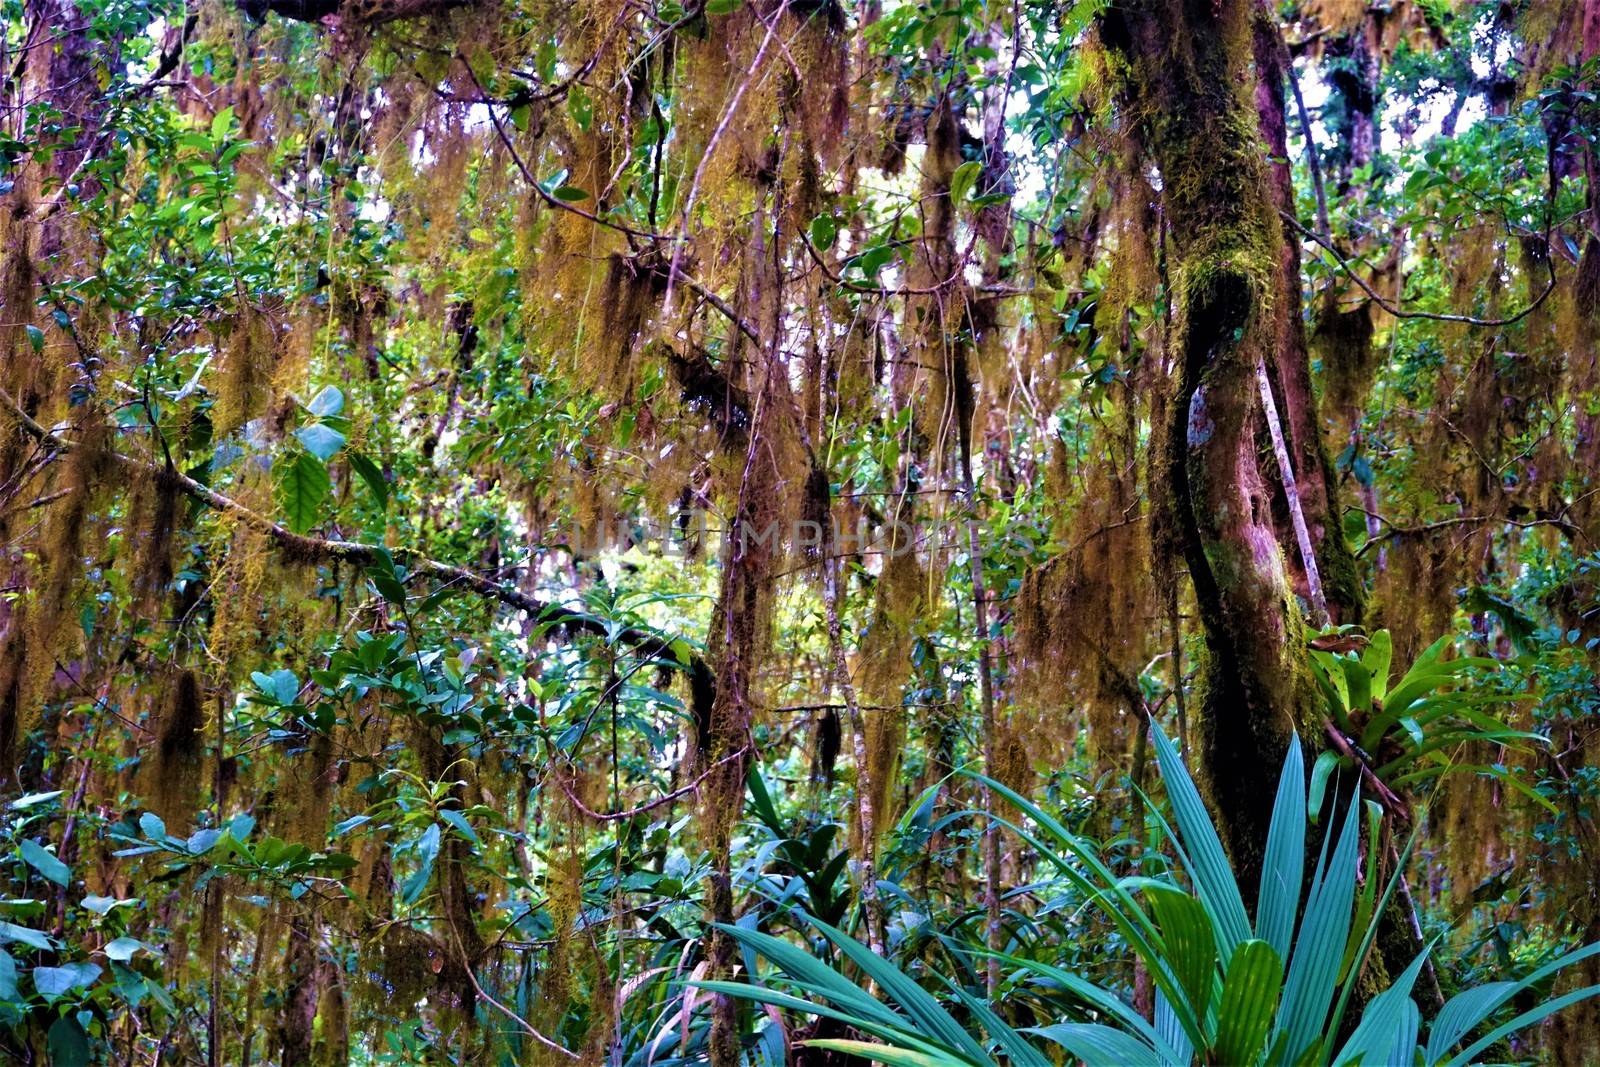 Tillandsia usneoides hanging from trees in rain forest by pisces2386